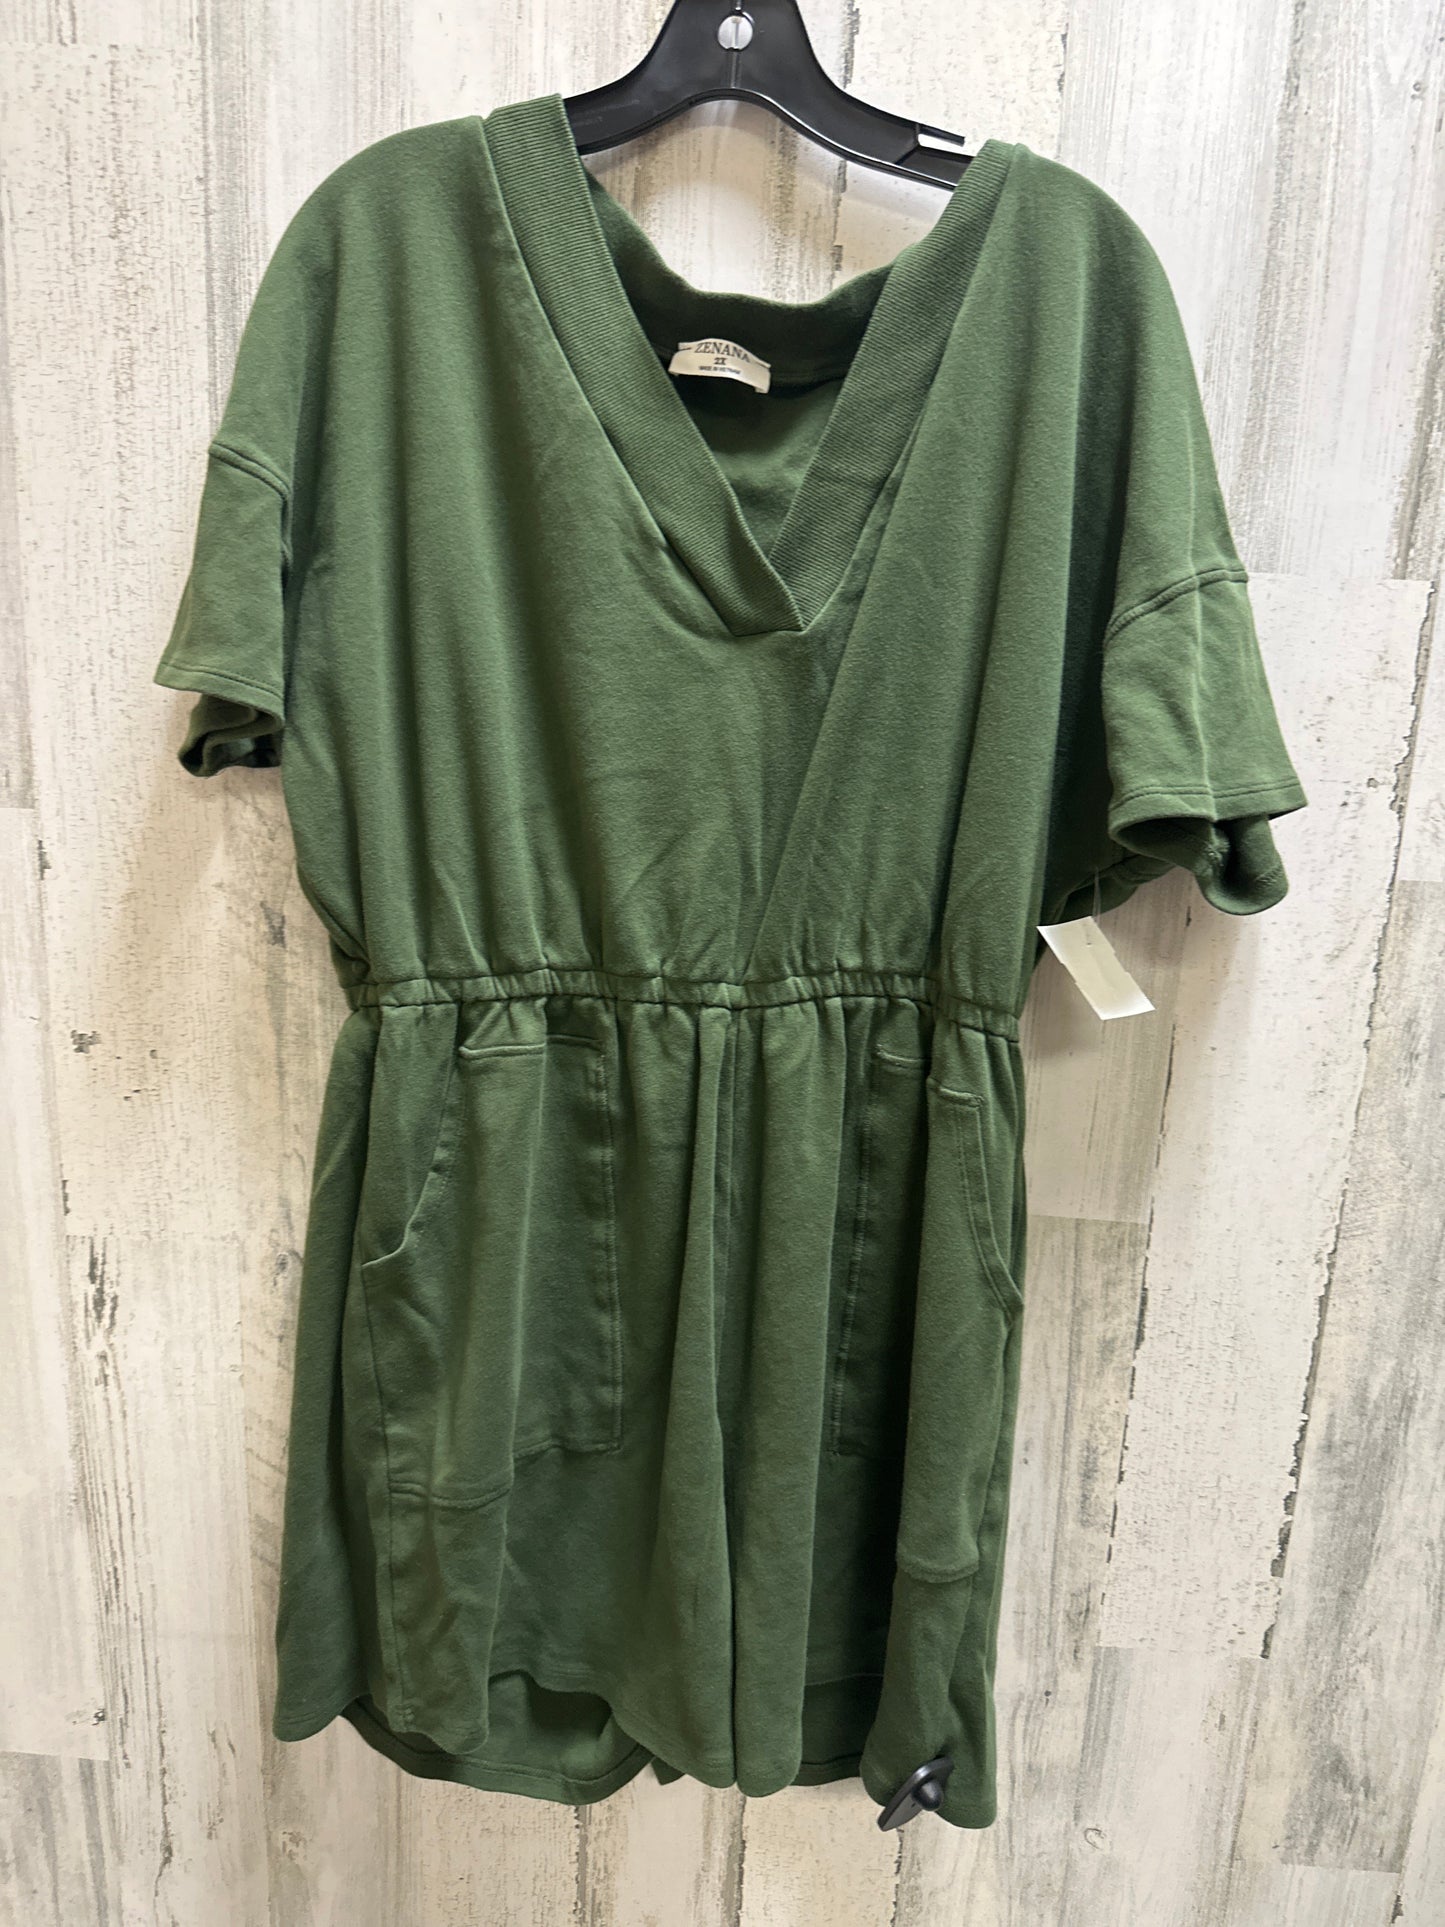 Green Romper Zenana Outfitters, Size 2x